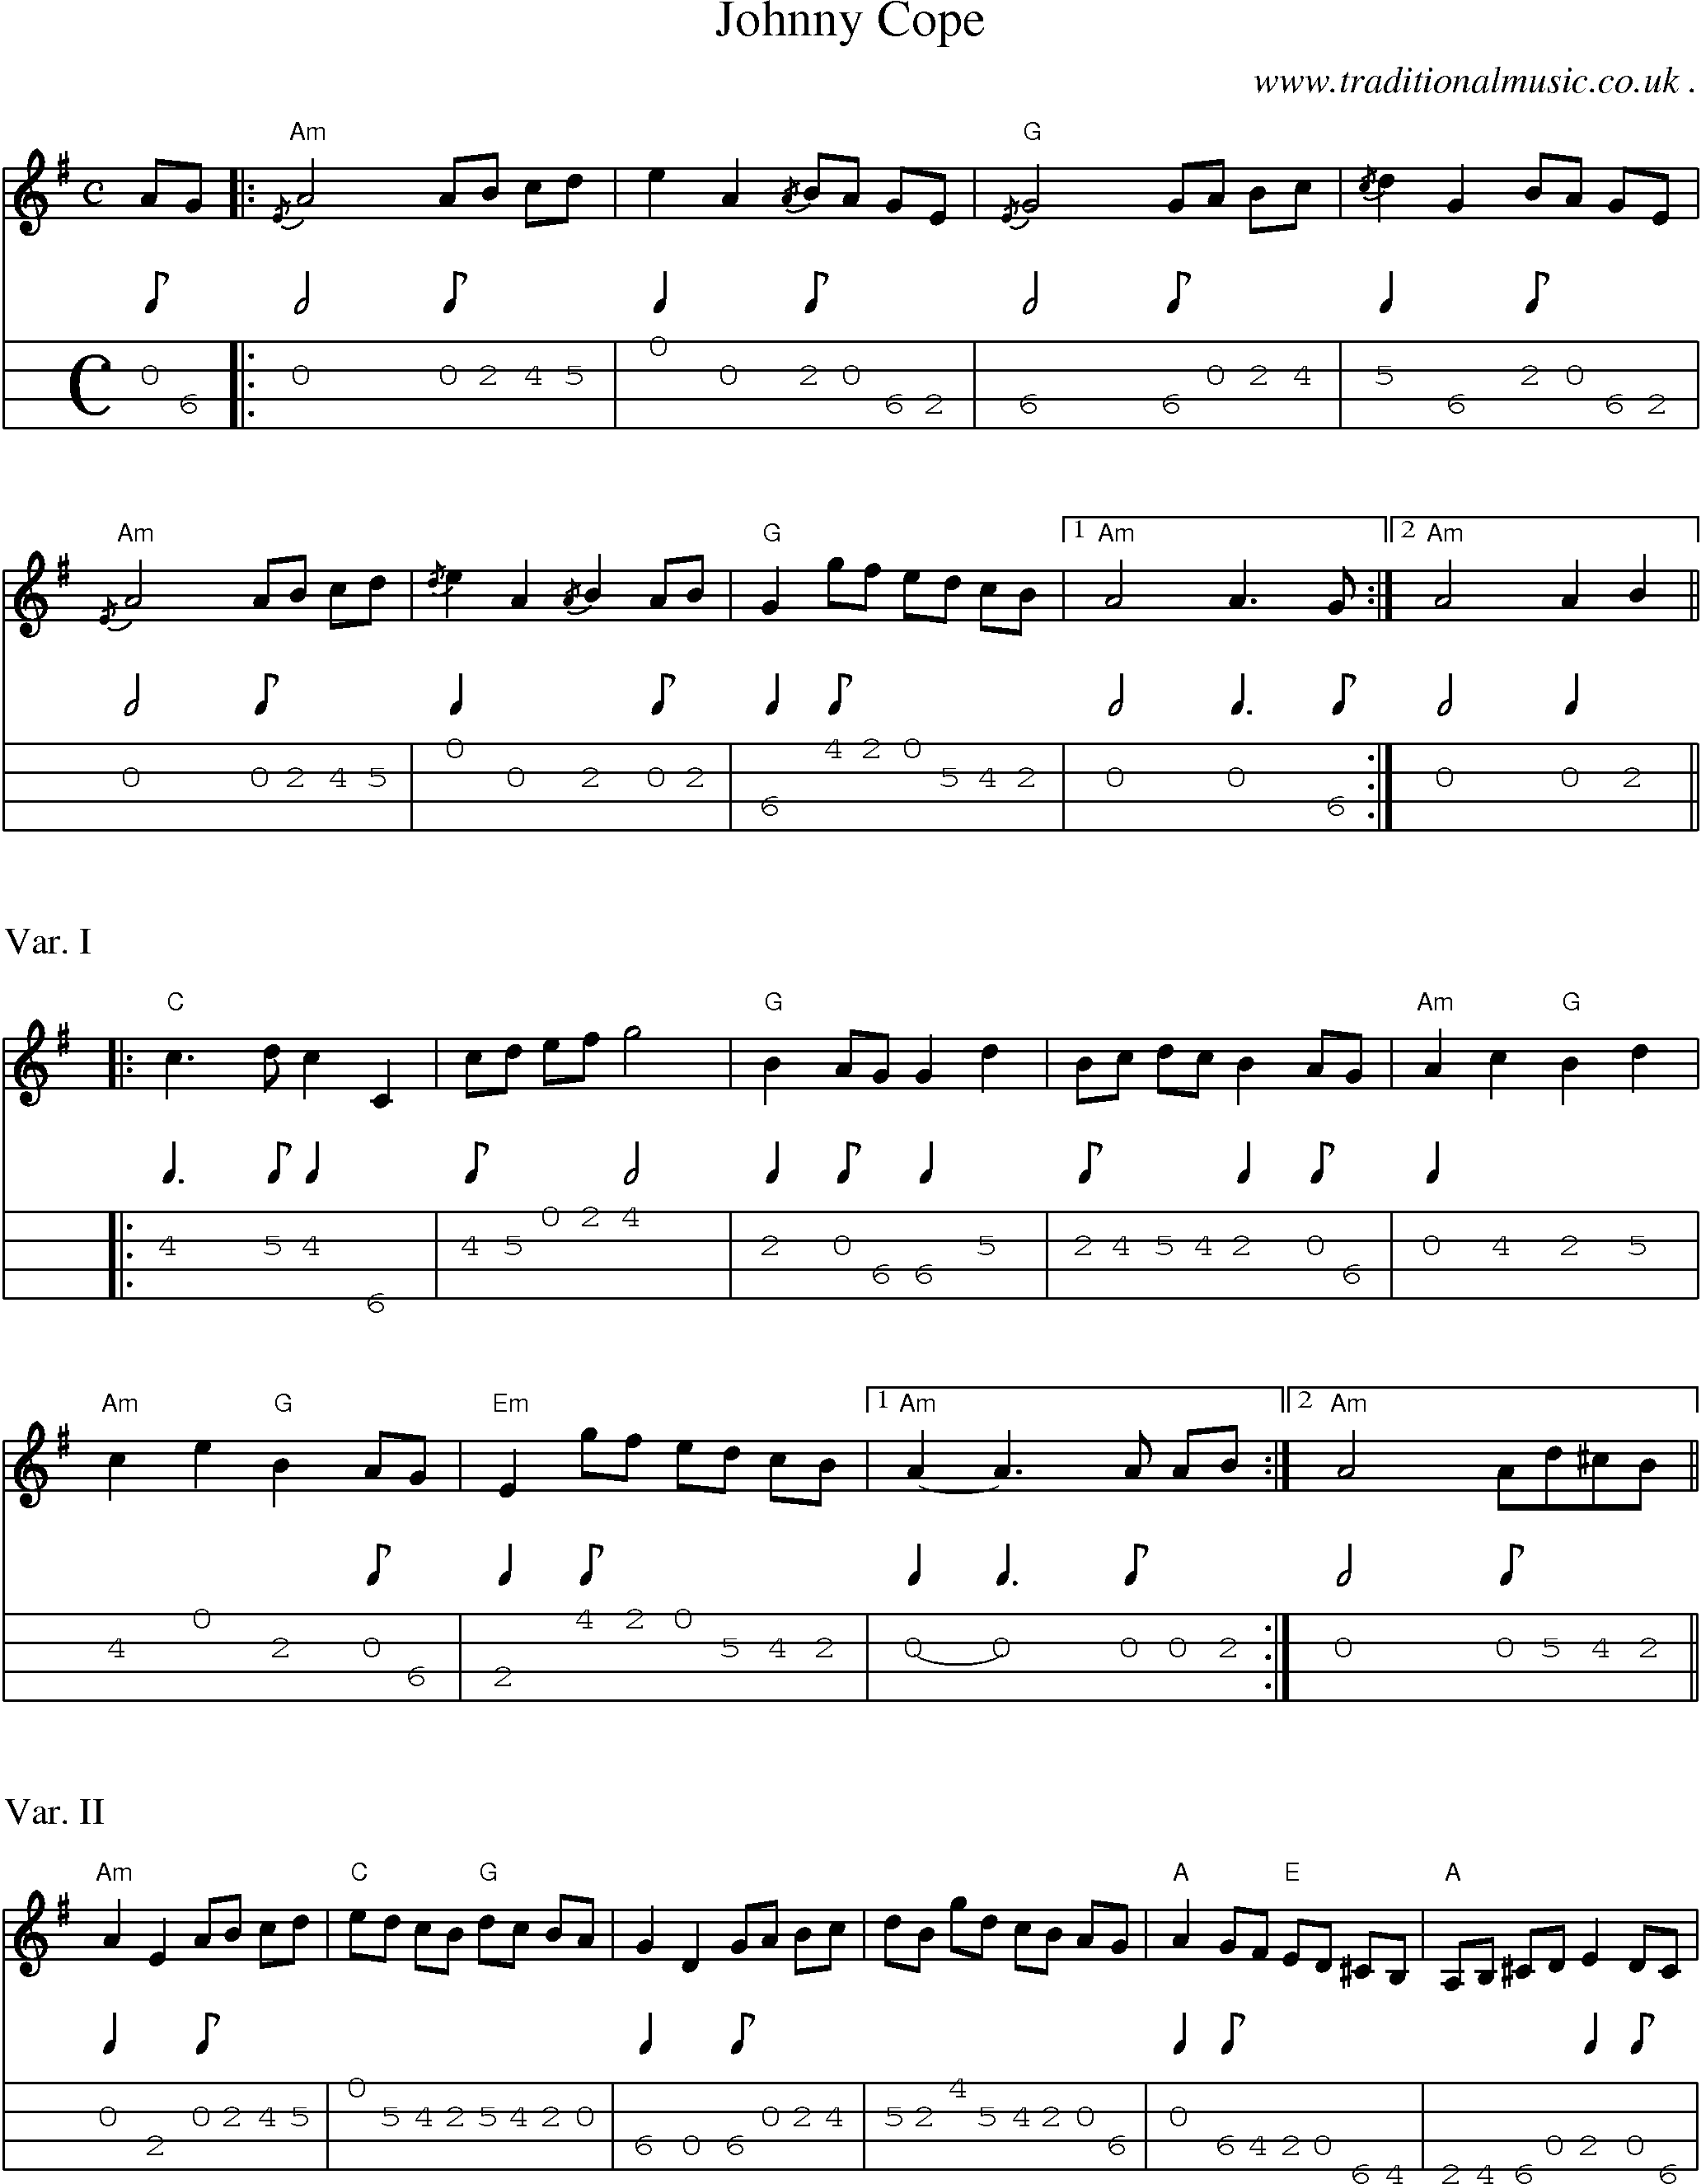 Sheet-music  score, Chords and Mandolin Tabs for Johnny Cope